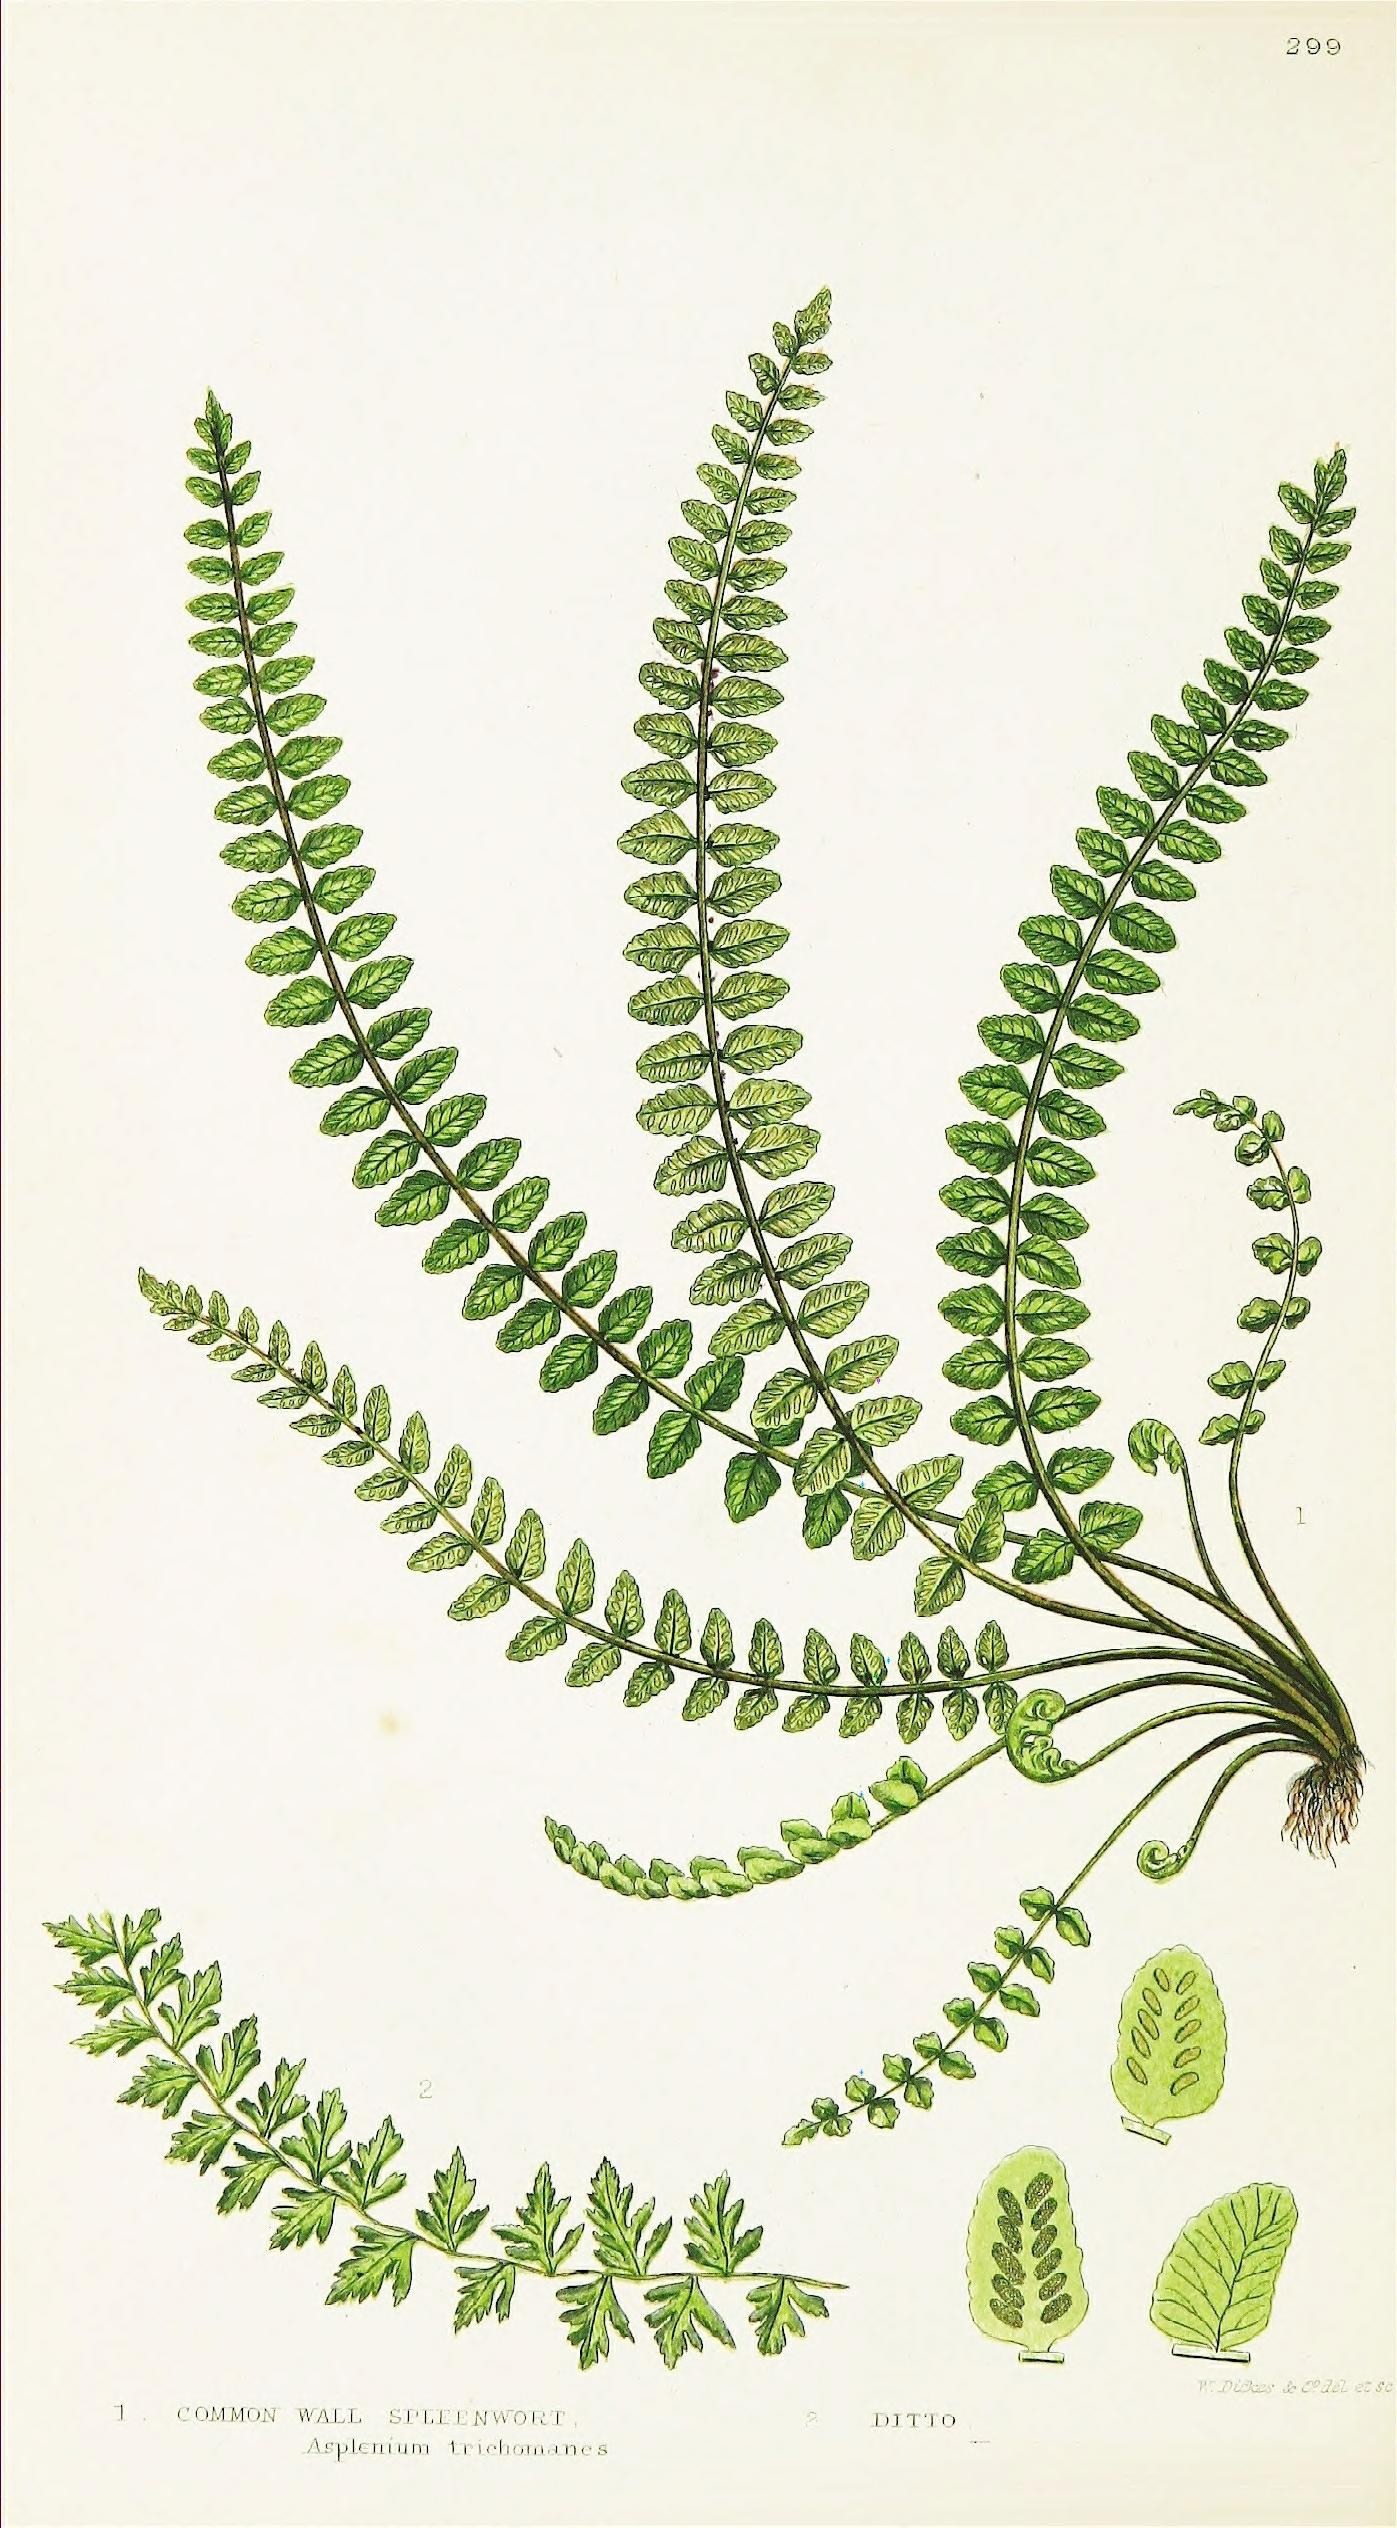 a drawing shows a group of leafy plants